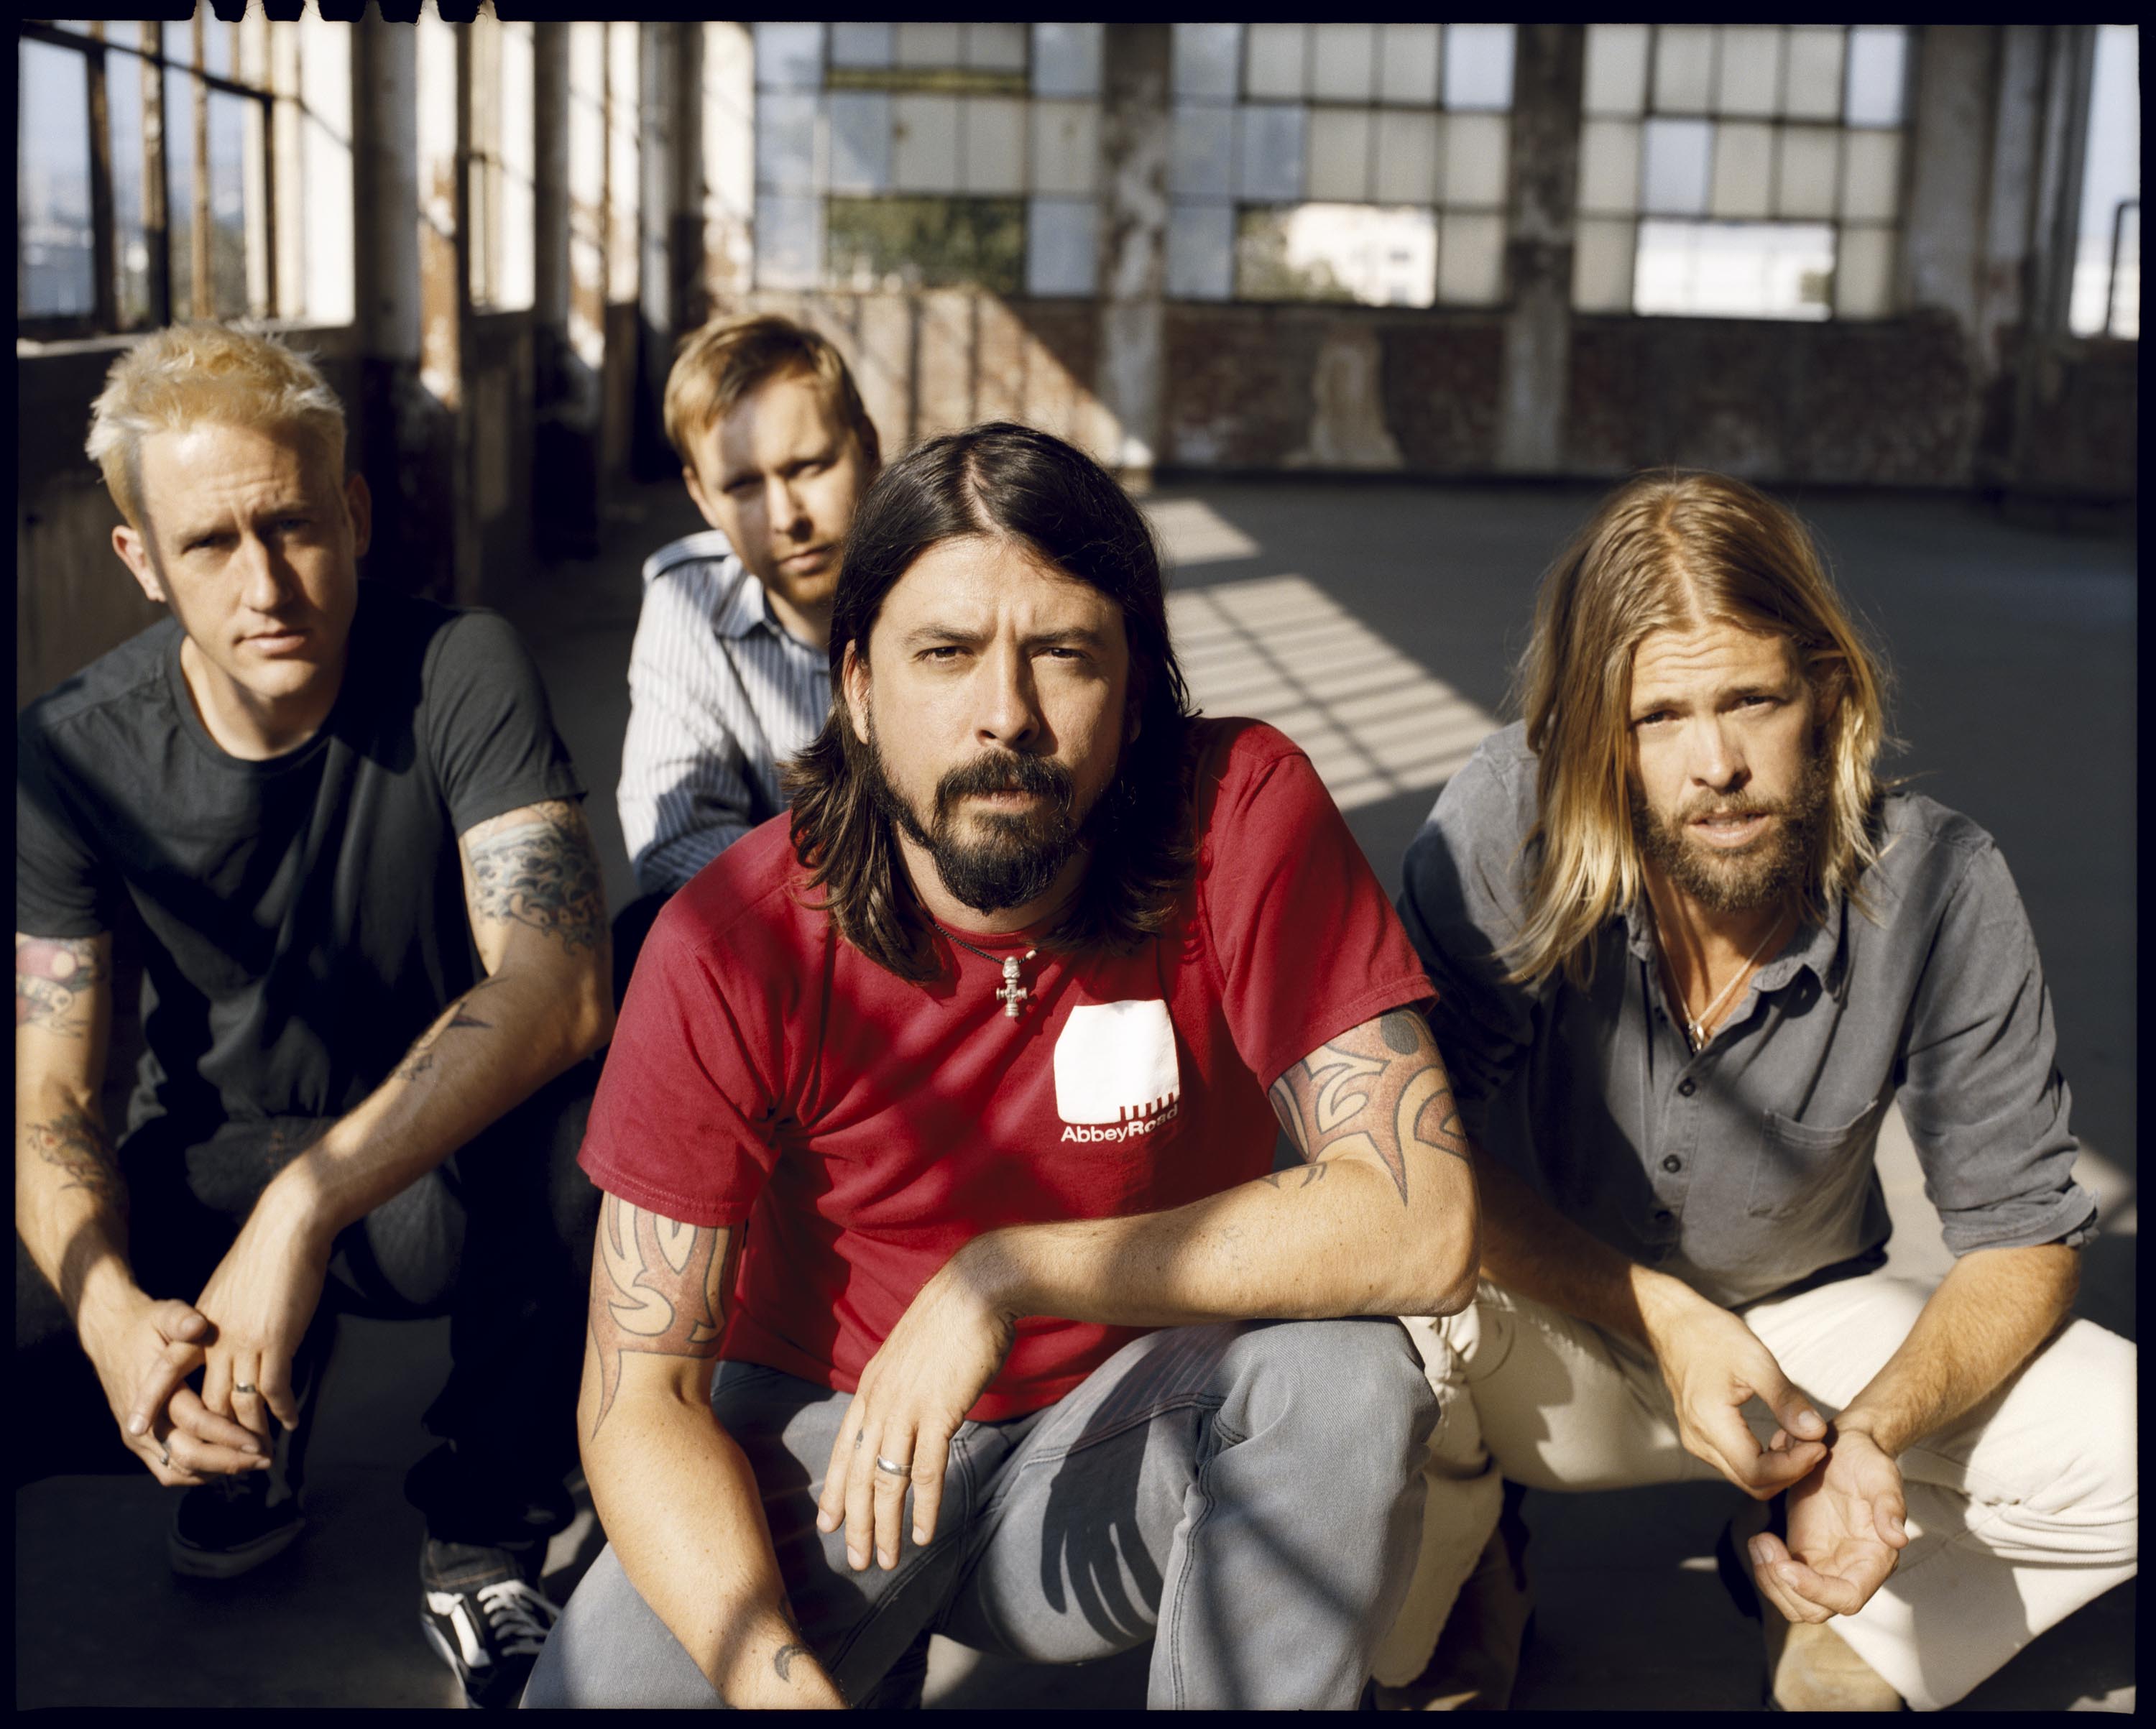 Speculation: More Foo Fighters are coming to Rocksmith 2014 | The.